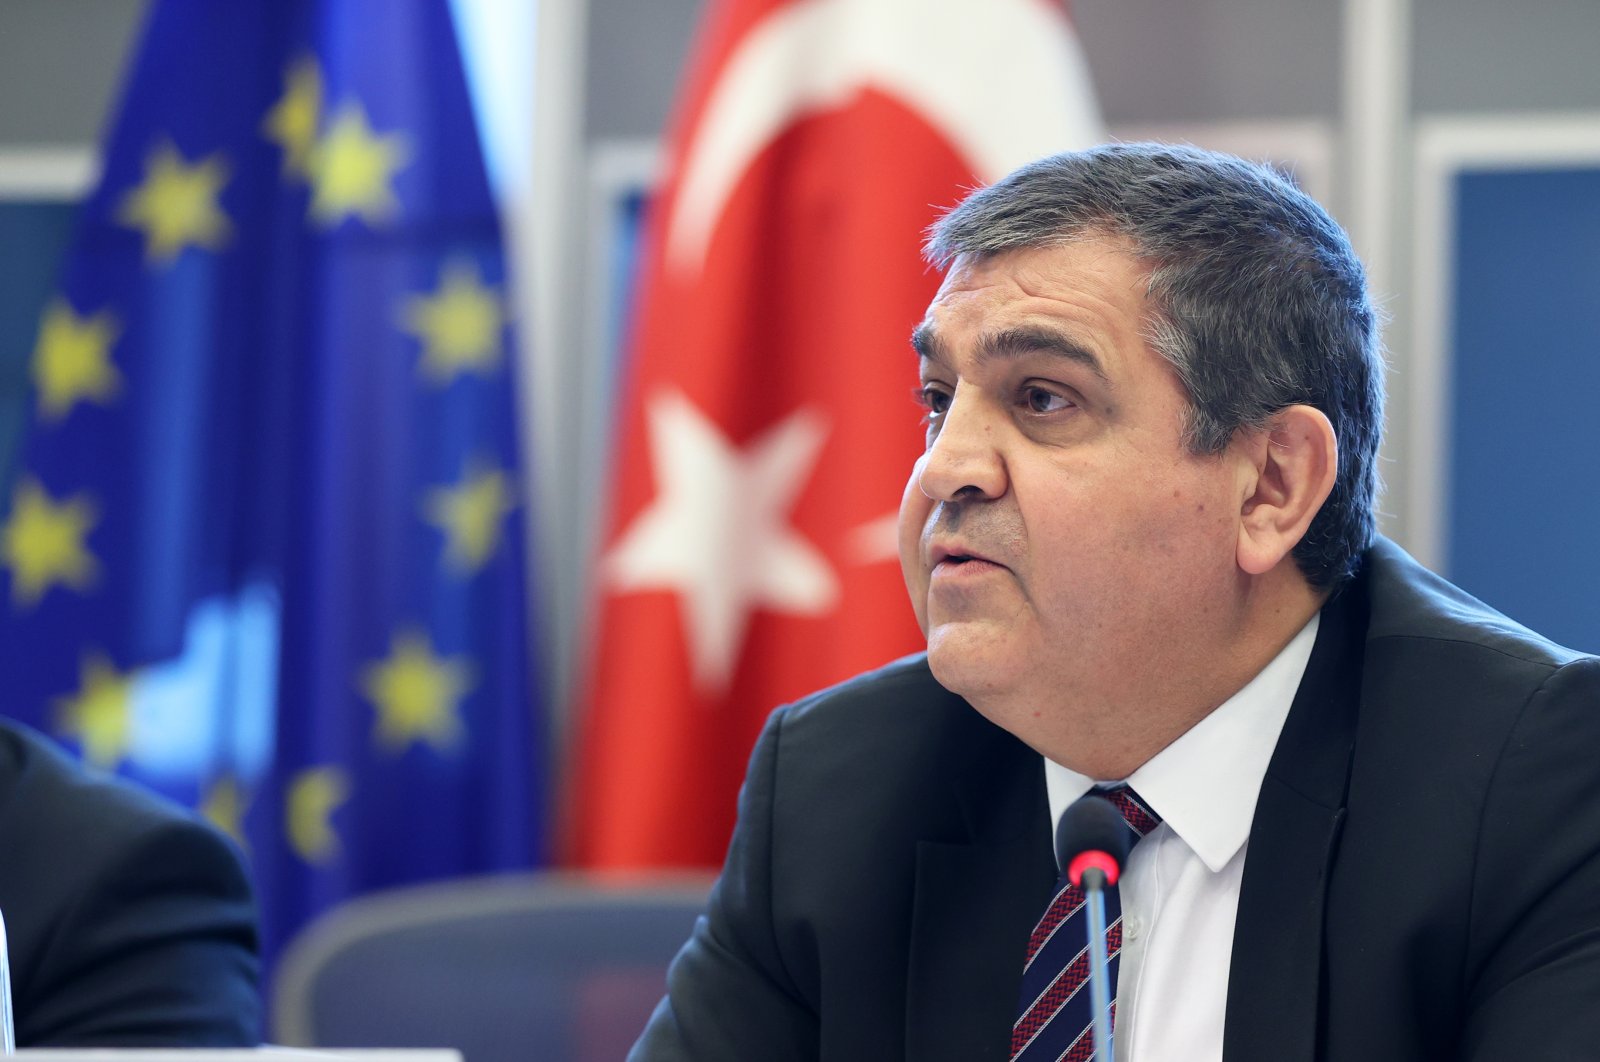 Deputy Foreign Minister Faruk Kaymakcı attends a meeting of the Turkey-EU Joint Parliamentary Committee in Brussels, Belgium, March 17, 2022. (AA)